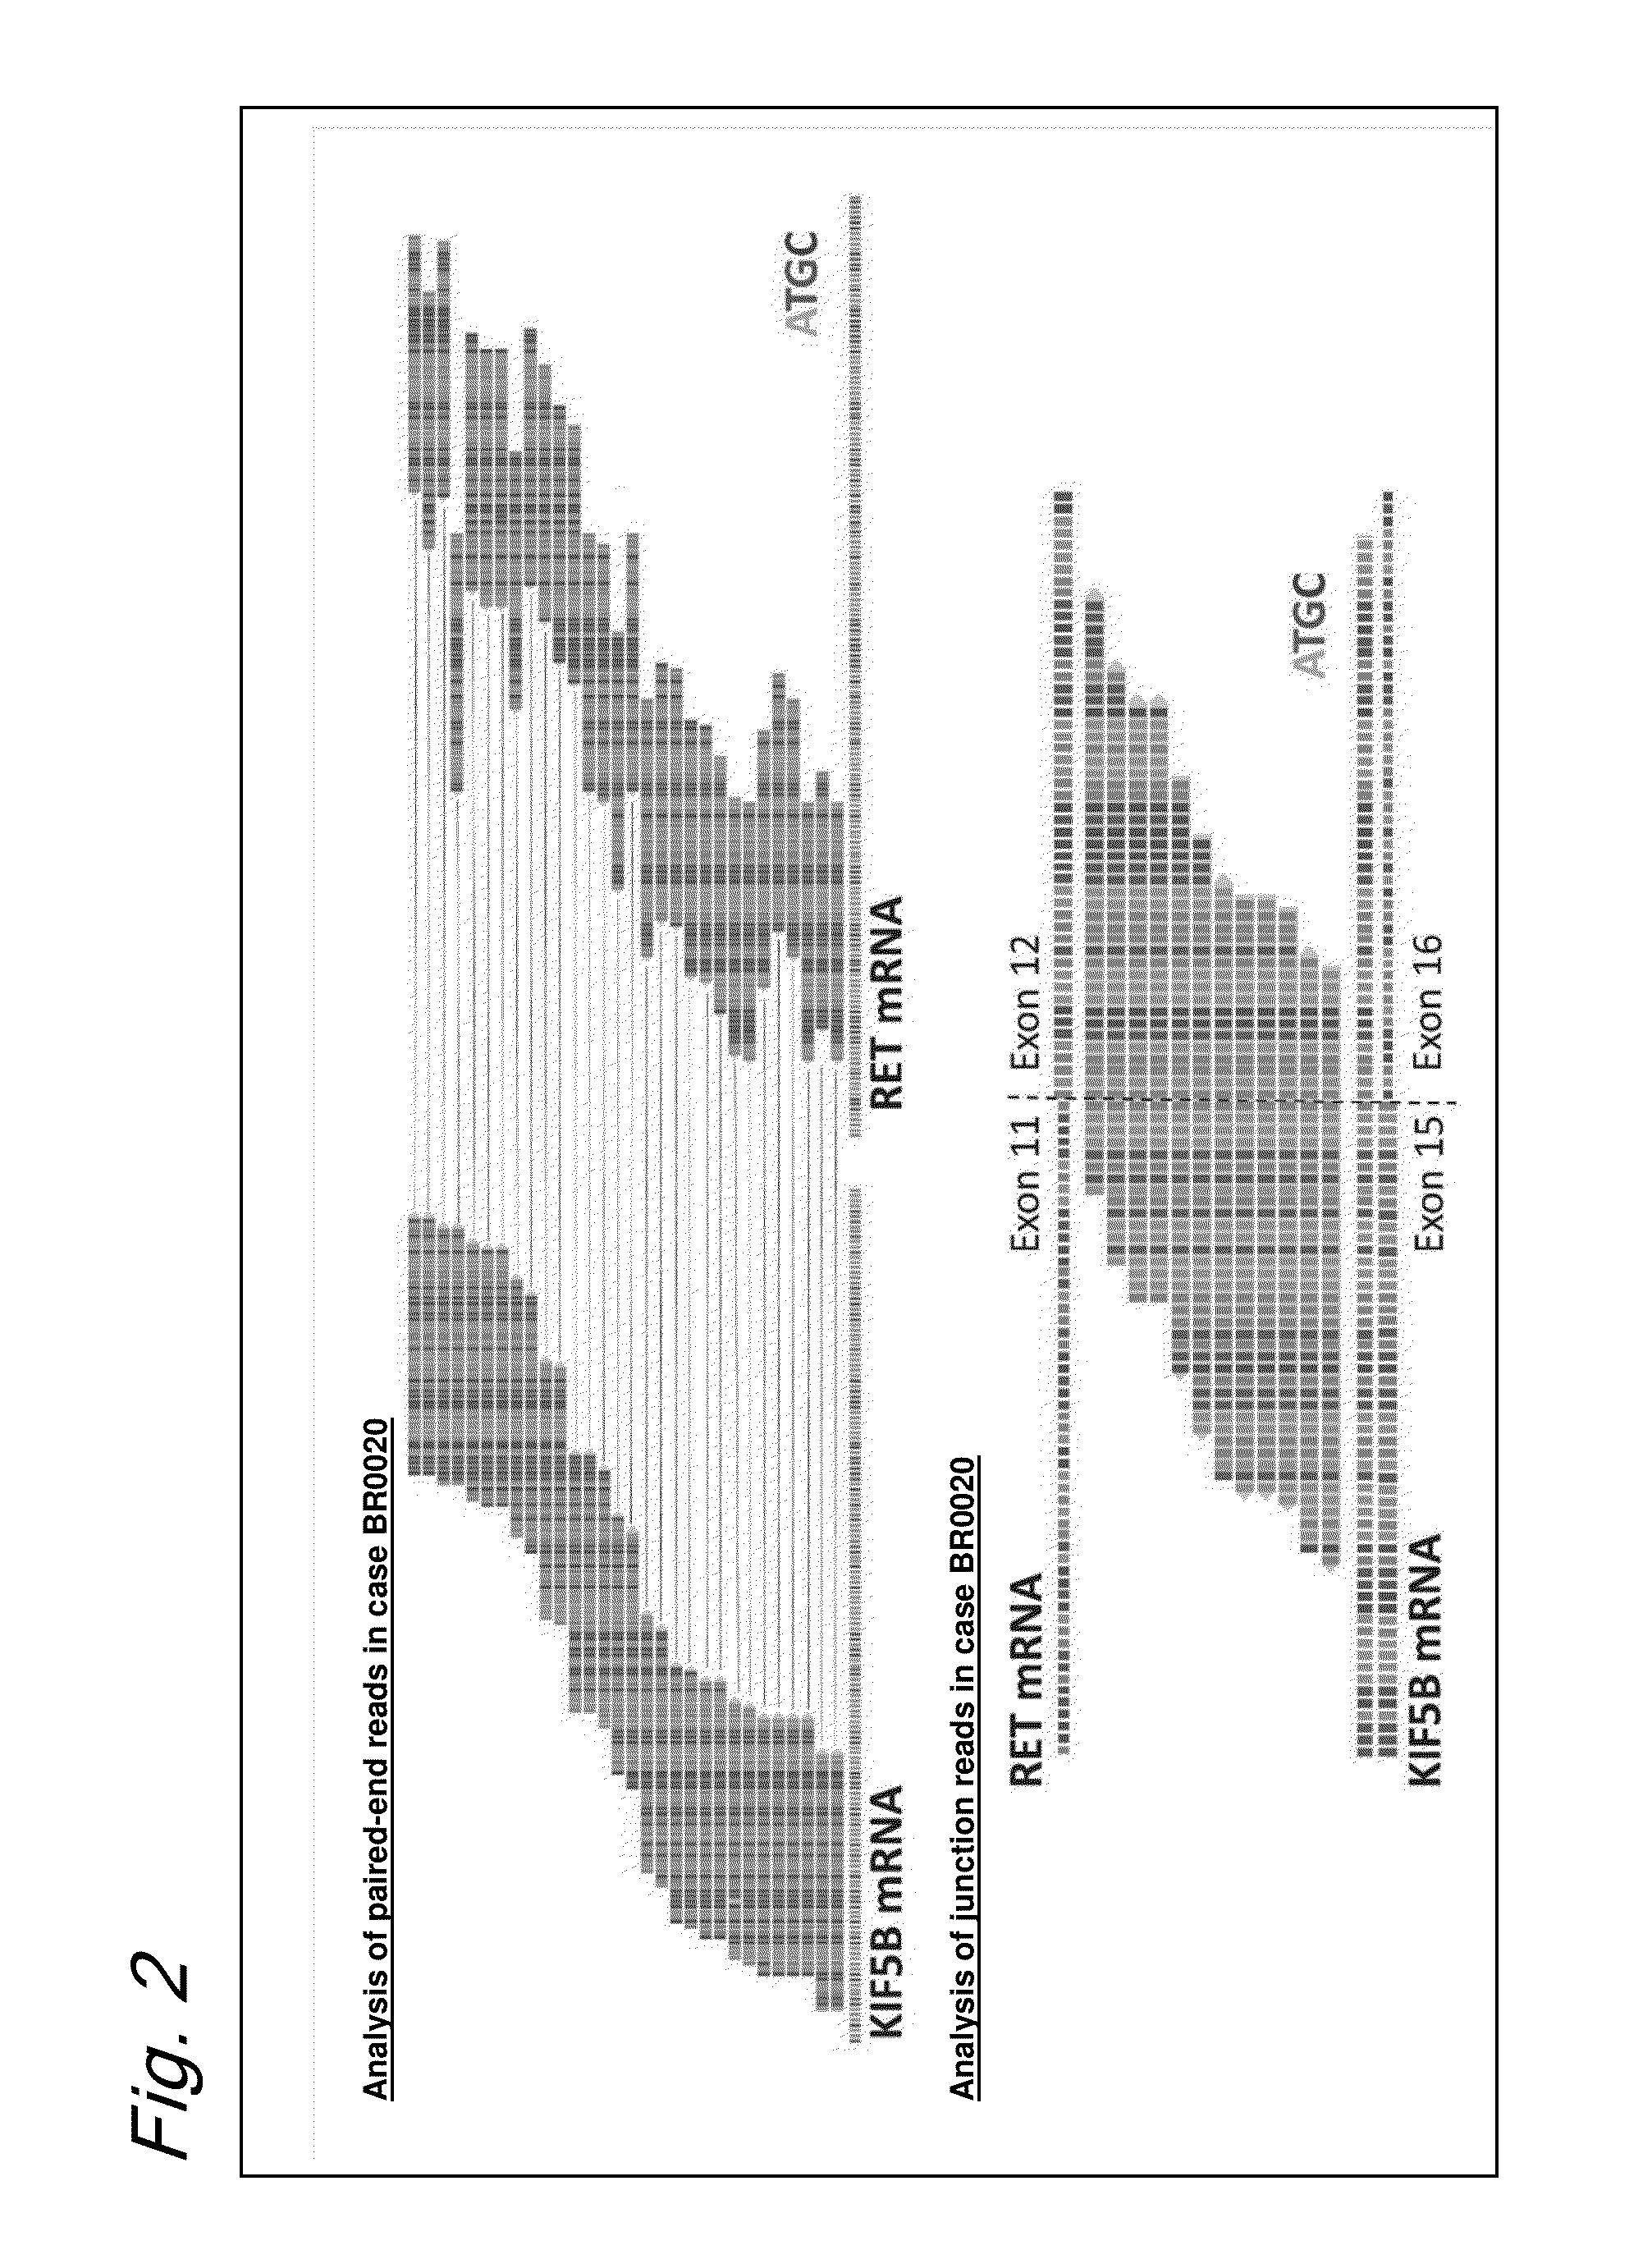 FUSION GENE OF Kif5b GENE AND Ret GENE, AND METHOD FOR DETERMINING EFFECTIVENESS OF CANCER TREATMENT TARGETING FUSION GENE